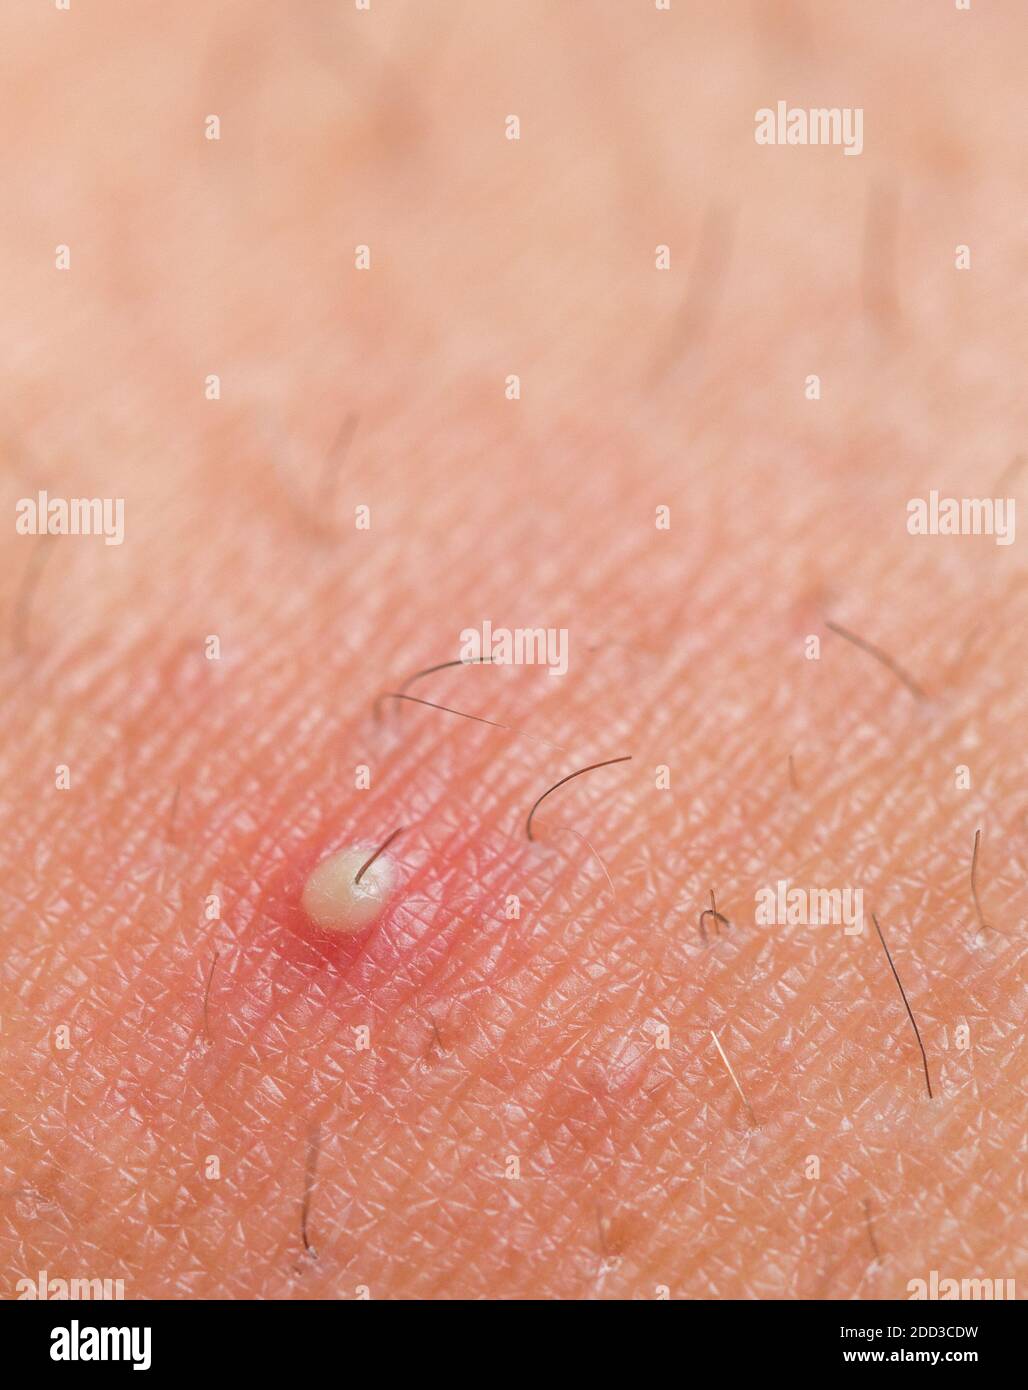 Infected ingrown hair with pus closeup view Stock Photo - Alamy